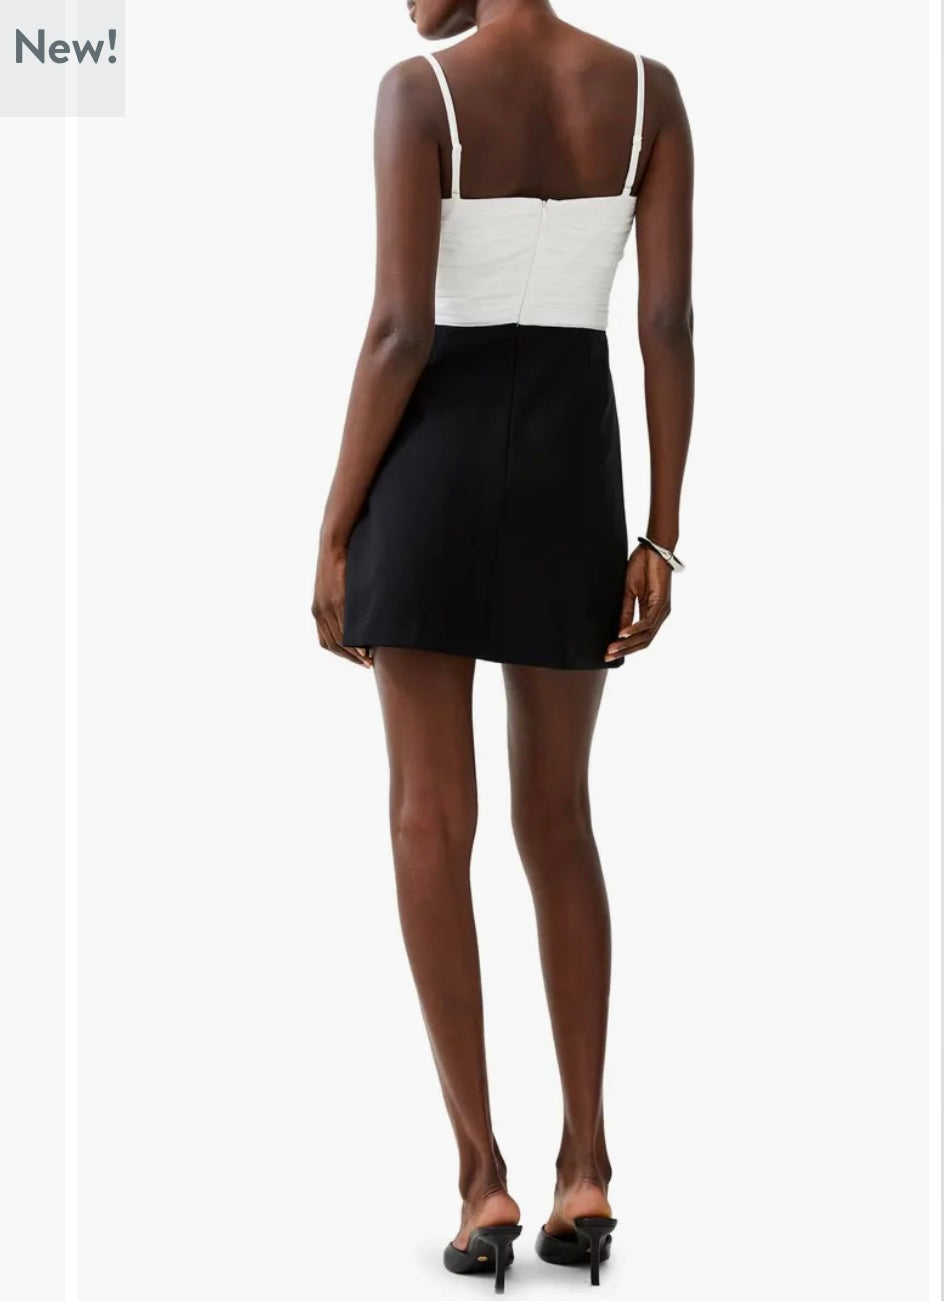 French Connection Black/White Whisper Strappy Dress